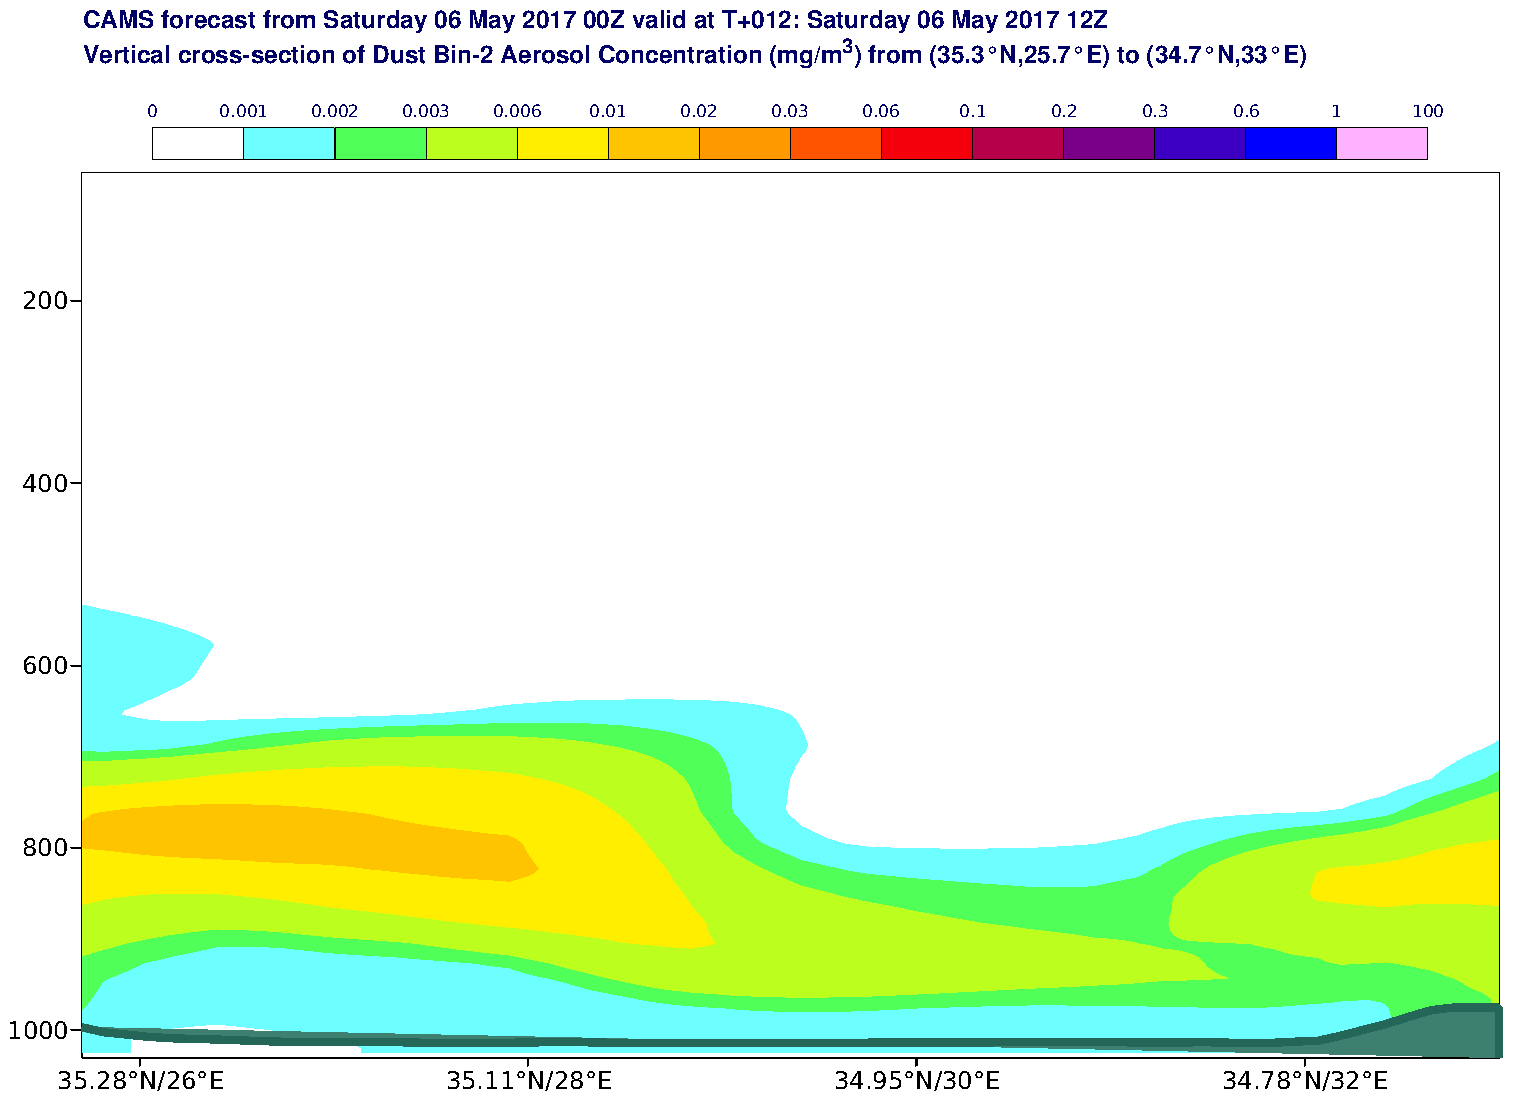 Vertical cross-section of Dust Bin-2 Aerosol Concentration (mg/m3) valid at T12 - 2017-05-06 12:00